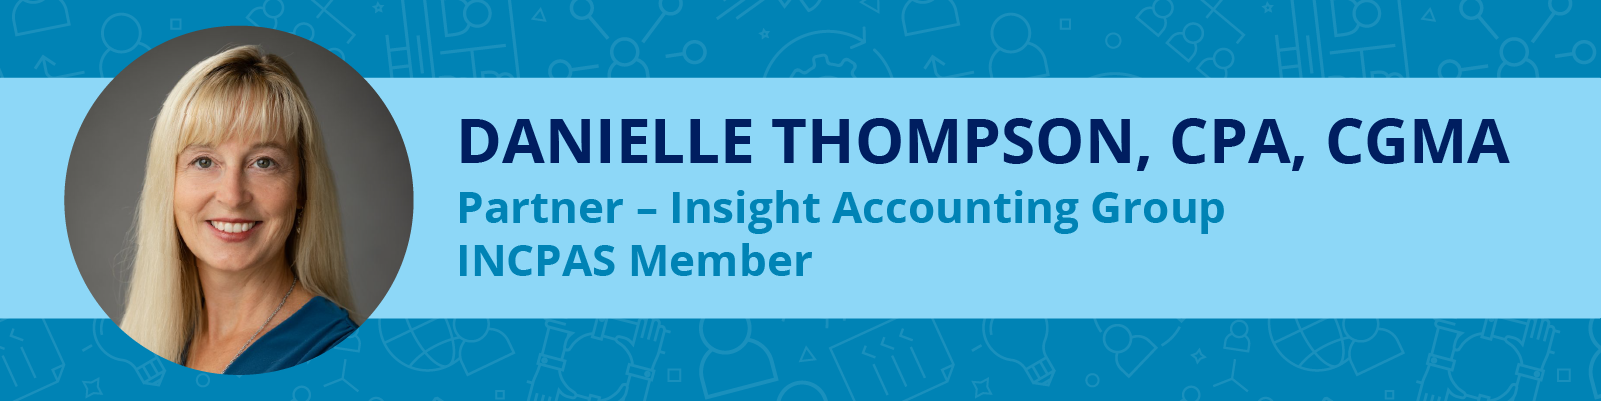 Graphic contains photo of Danielle Thompson, CPA CGMA, partner at Insight Accounting Group.